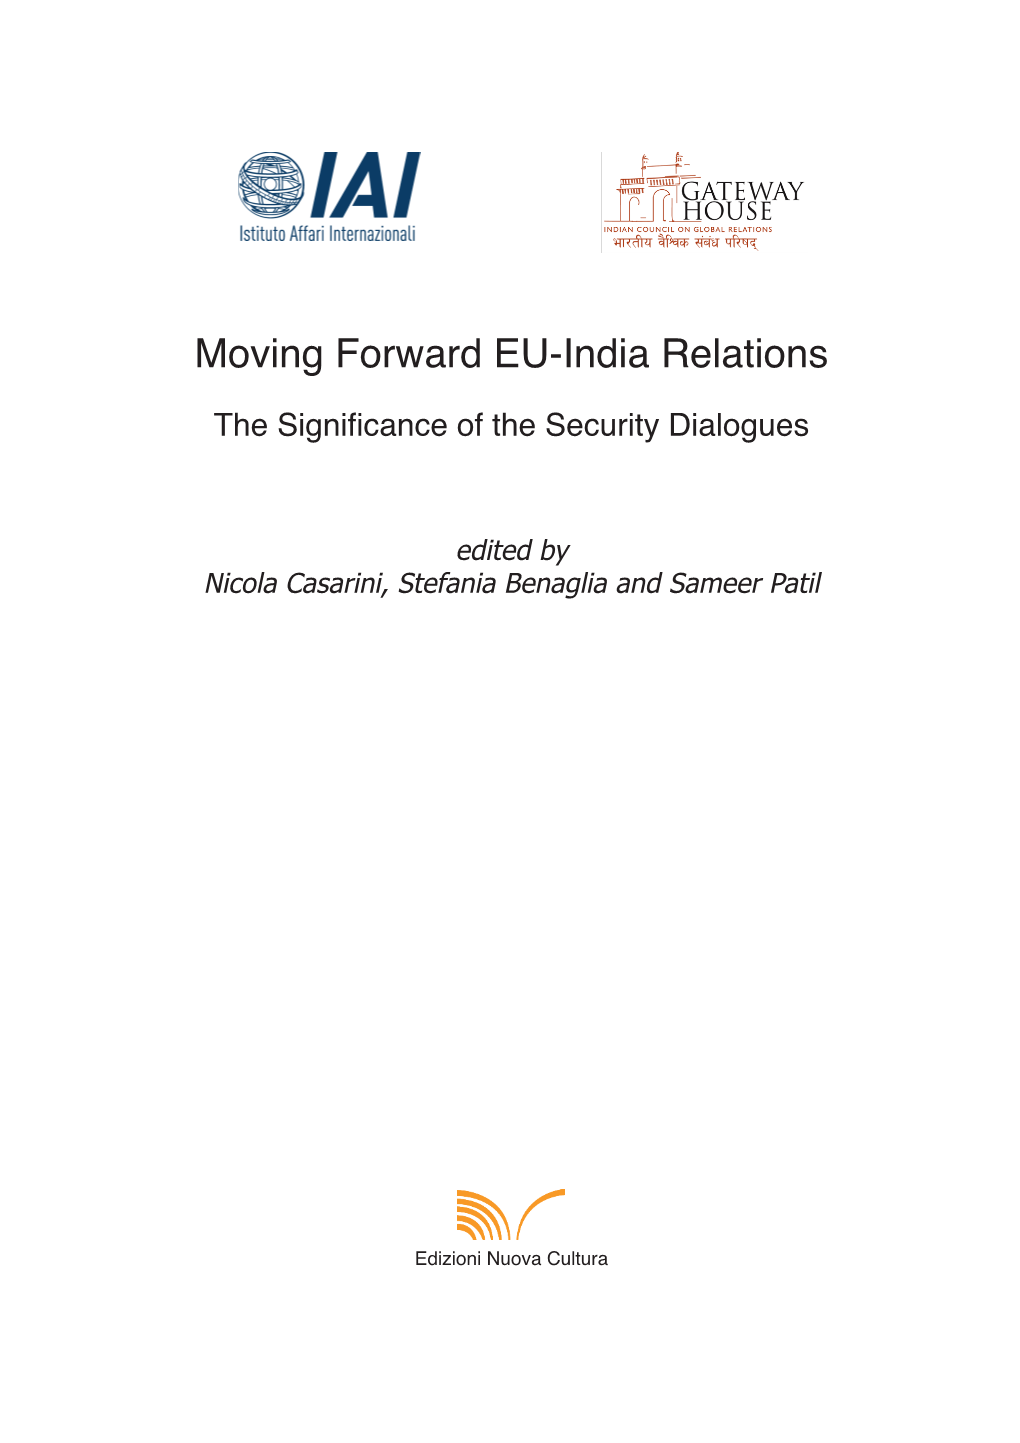 Moving Forward EU-India Relations. the Significance of the Security